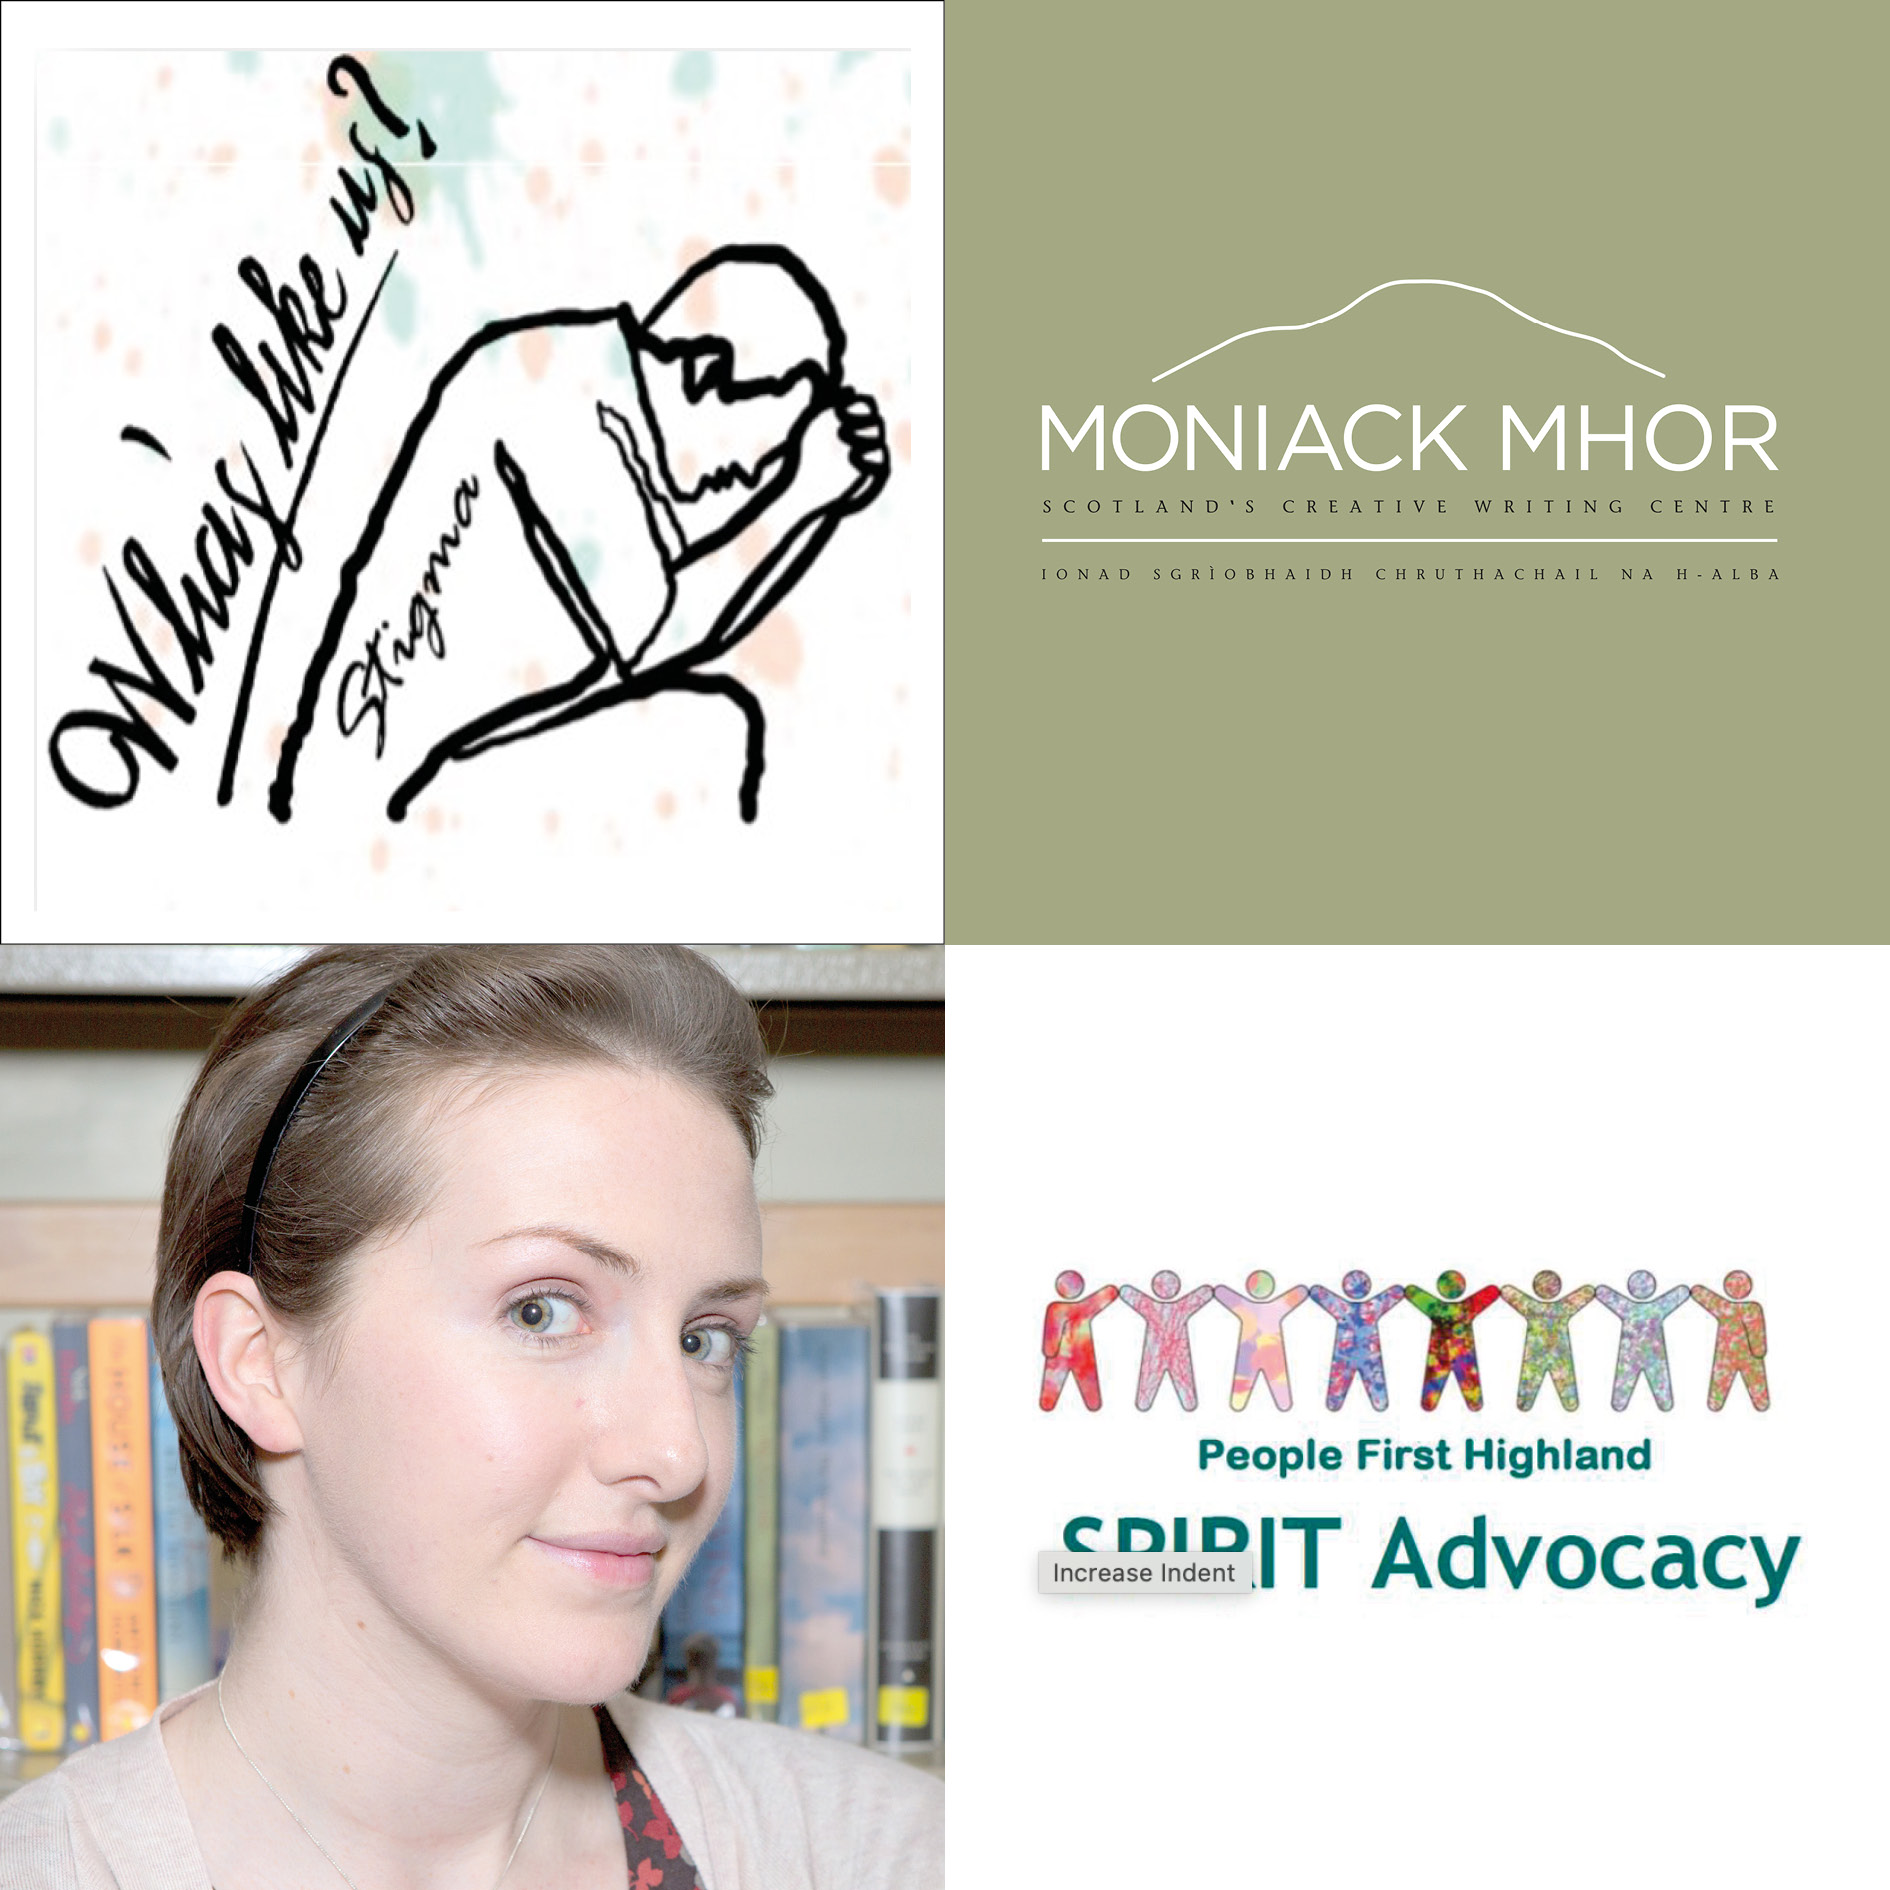 Spirit Advocacy Workshop: Poetry with Aoife Lyall